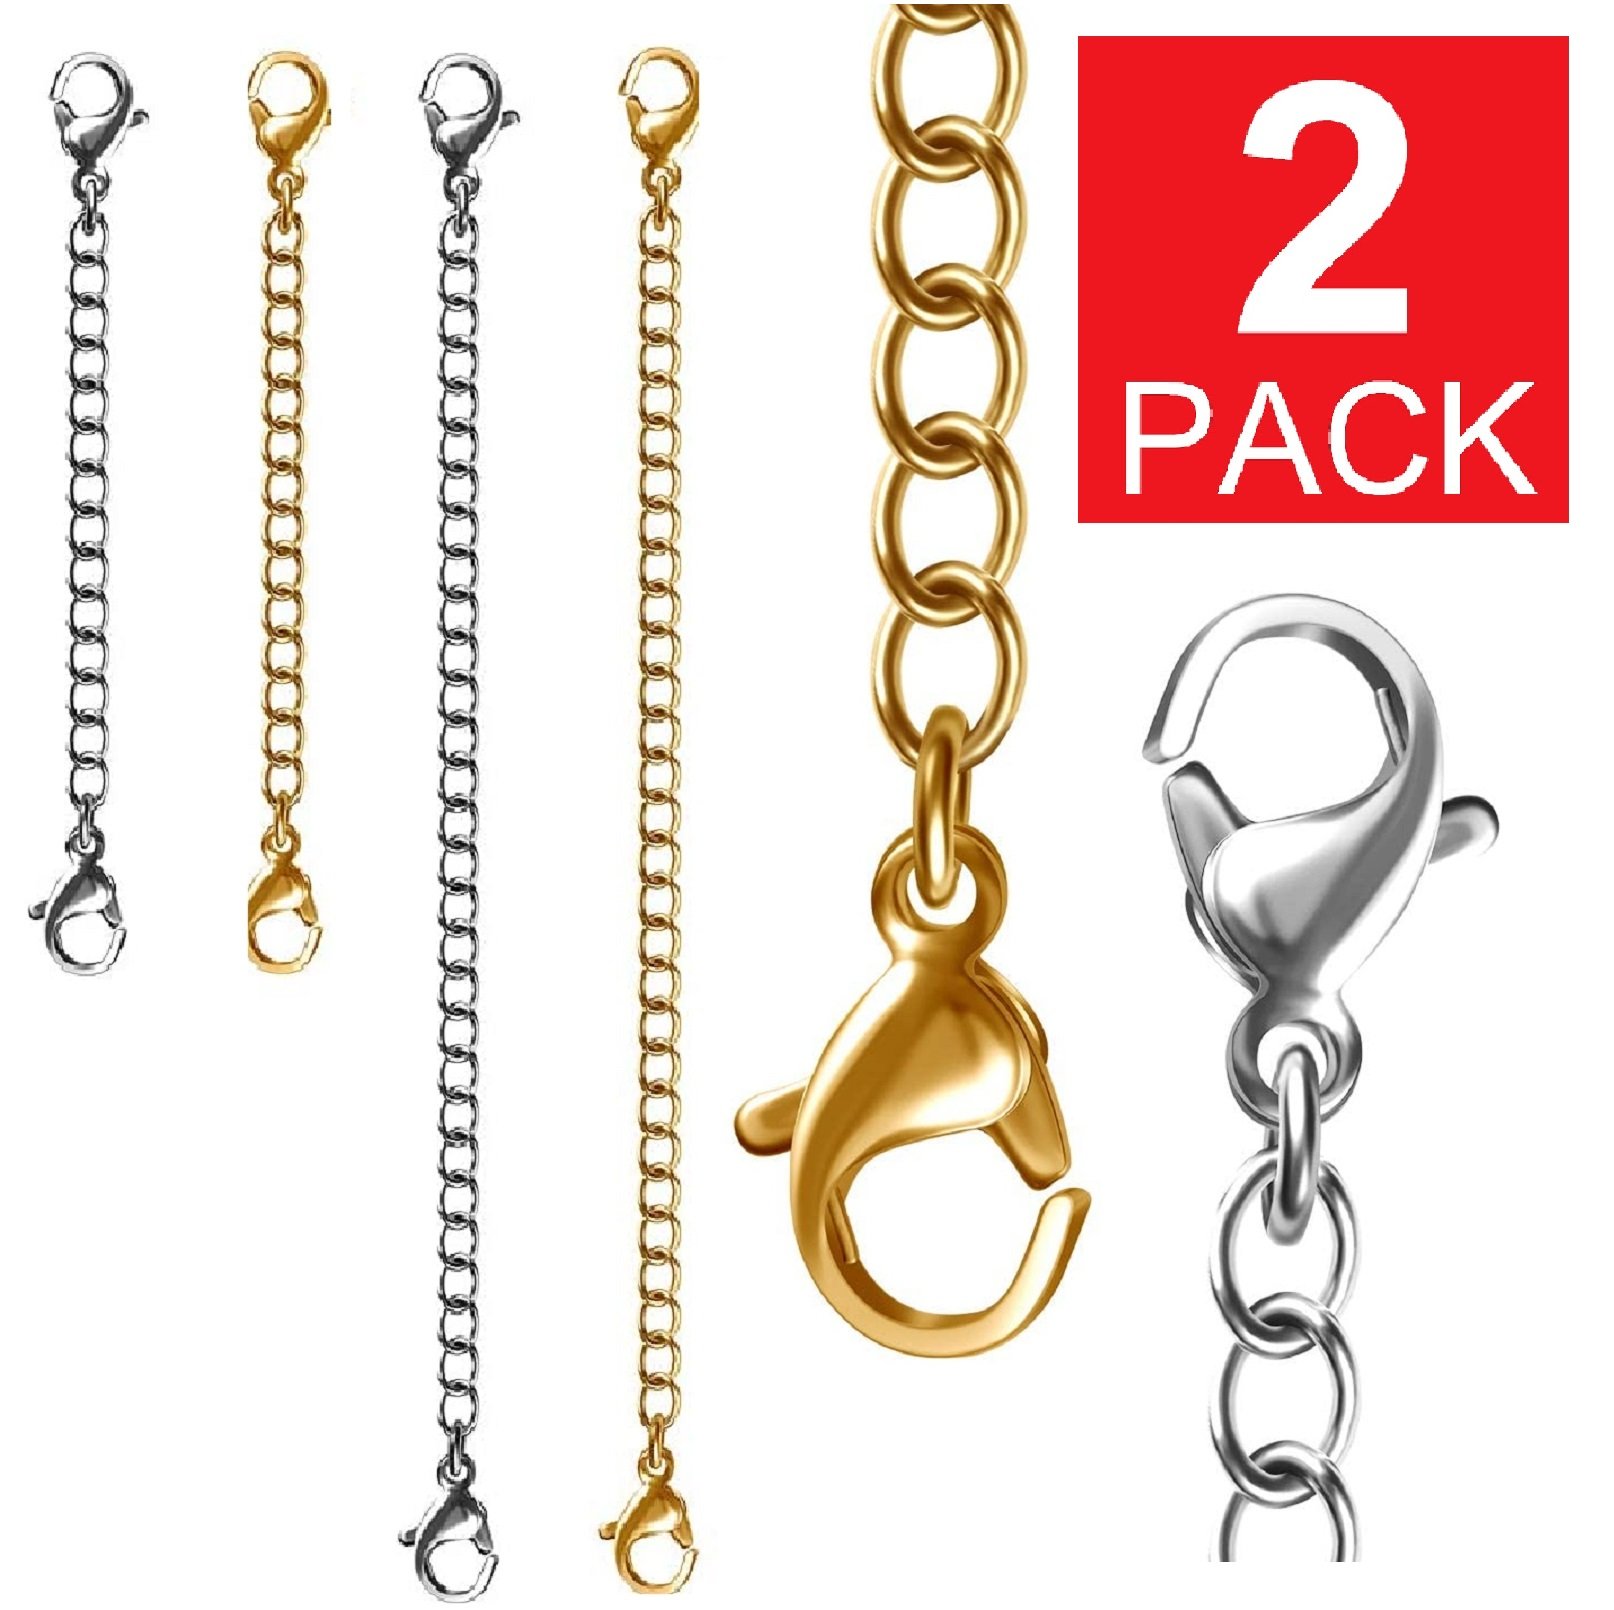 5Pcs Fashion Lobster Clasps Extender Chain Set Stainless Steel Chain Jewelry V 